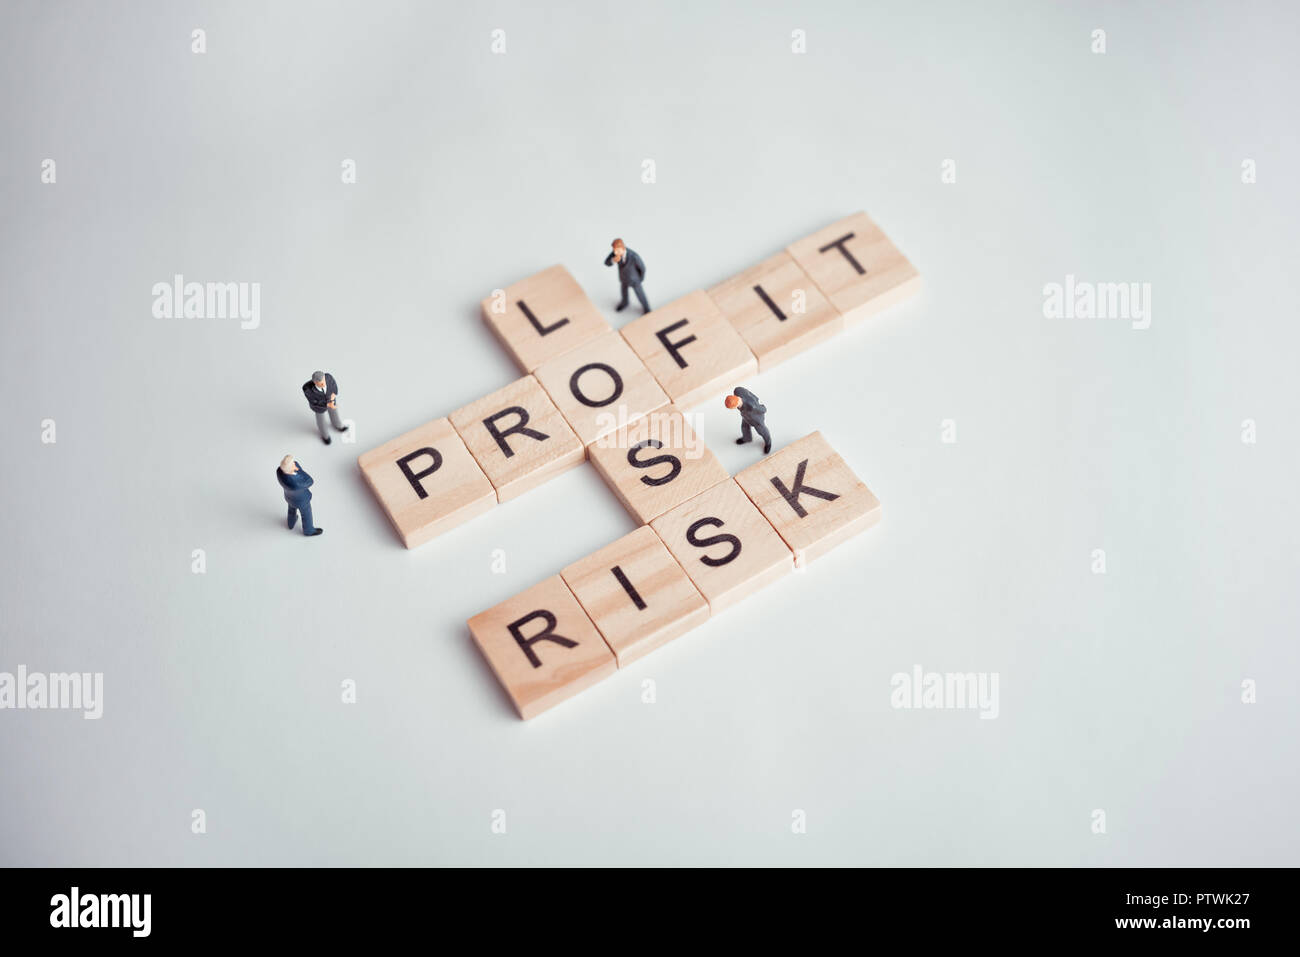 Risk Profit and Loss Crossword Puzzle Business concept Stock Photo